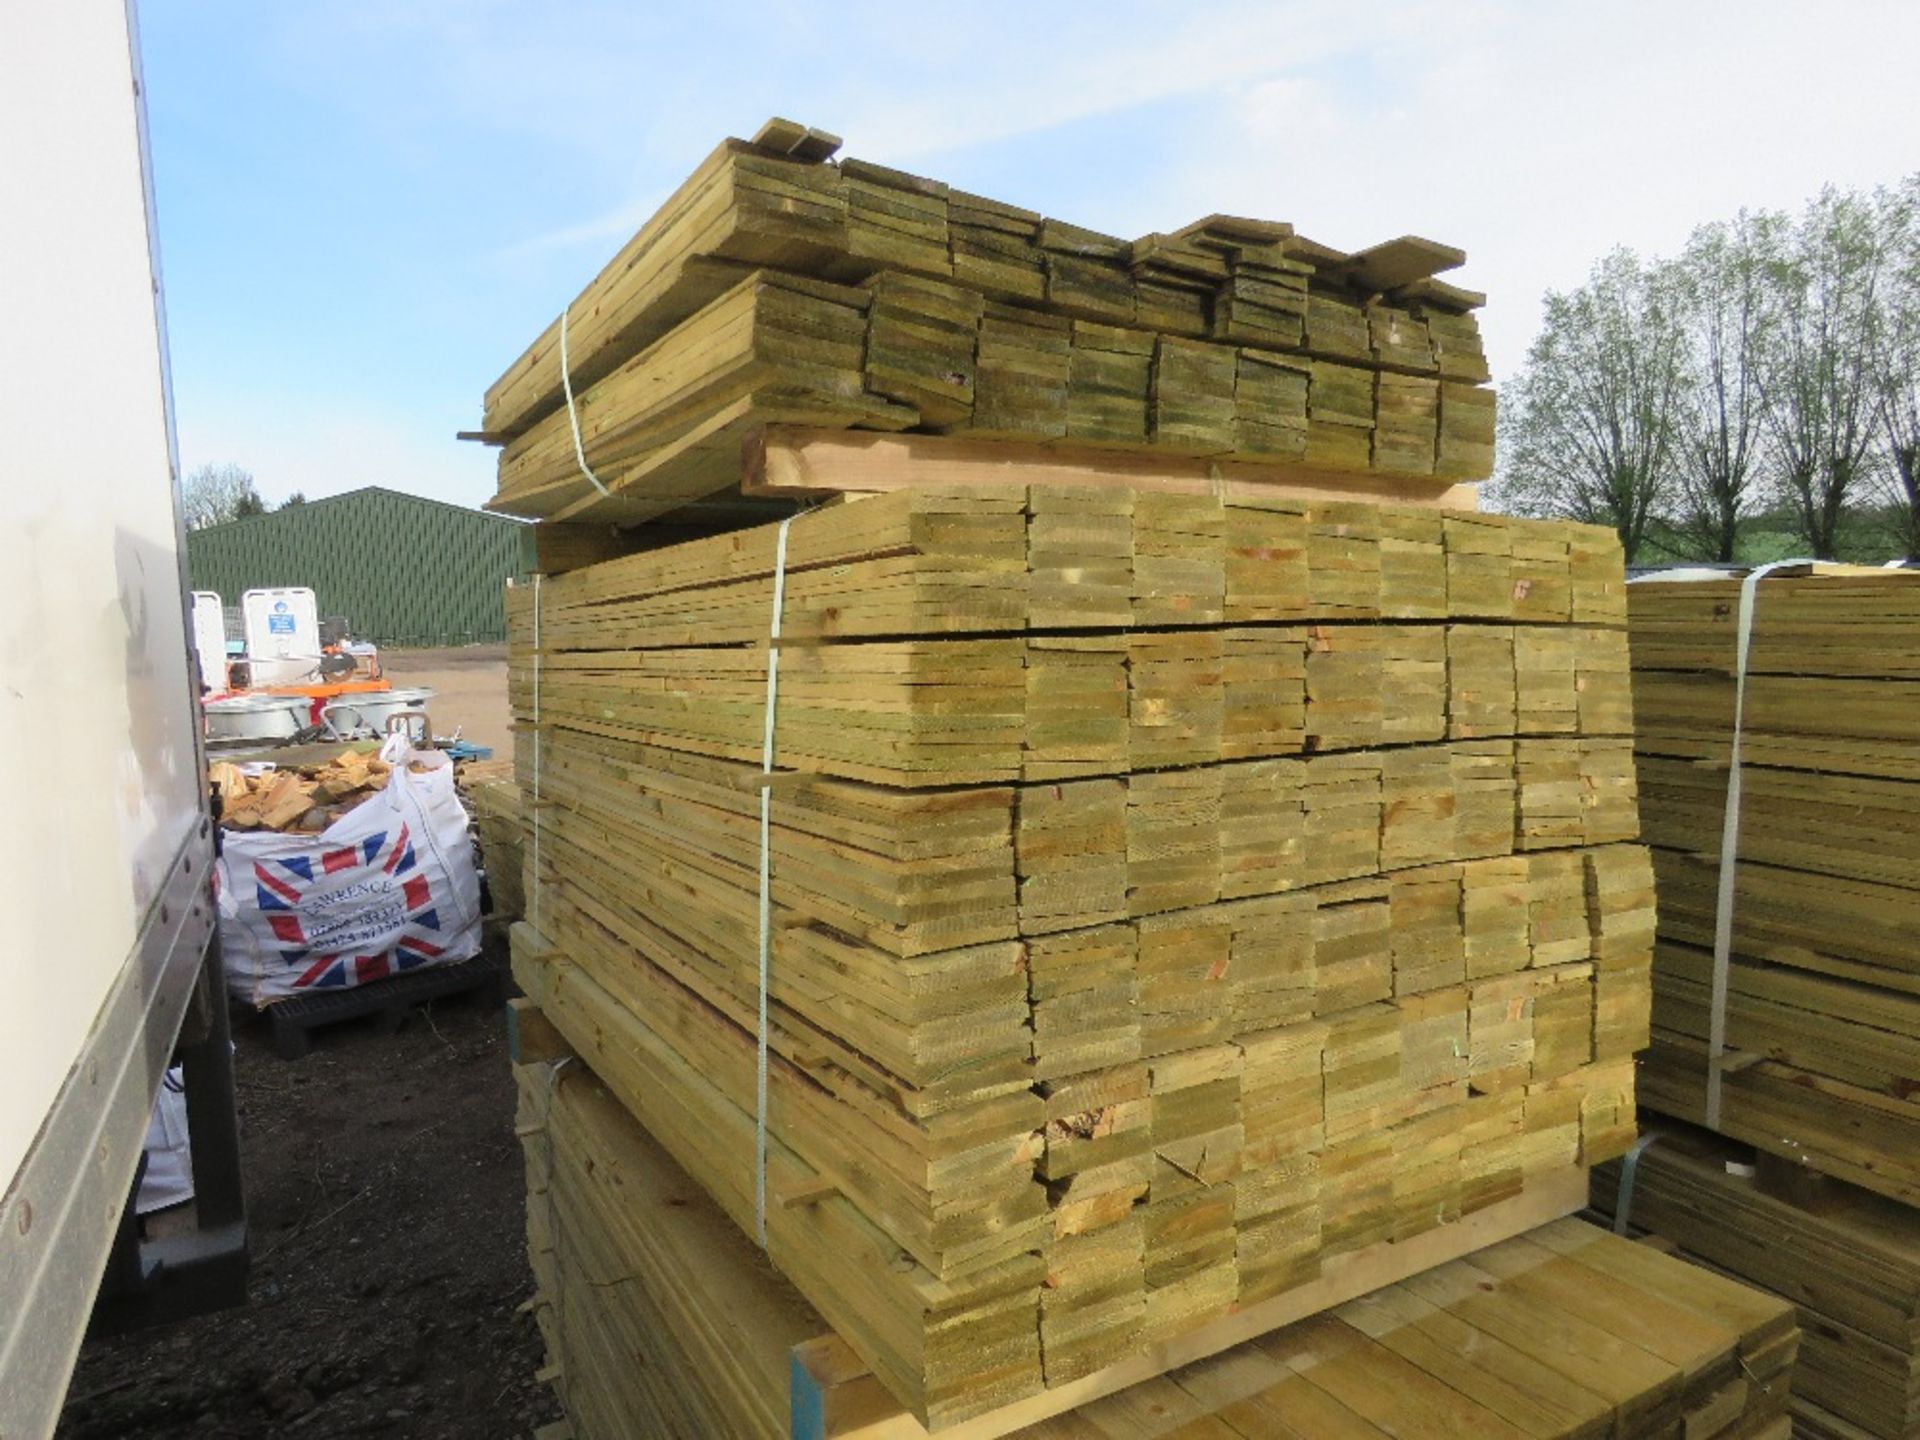 LARGE PACK OF PRESSURE TREATED FEATHER EDGE TIMBER CLADDING BOARDS. 1.5M LENGTH X 100MM WIDTH APPROX